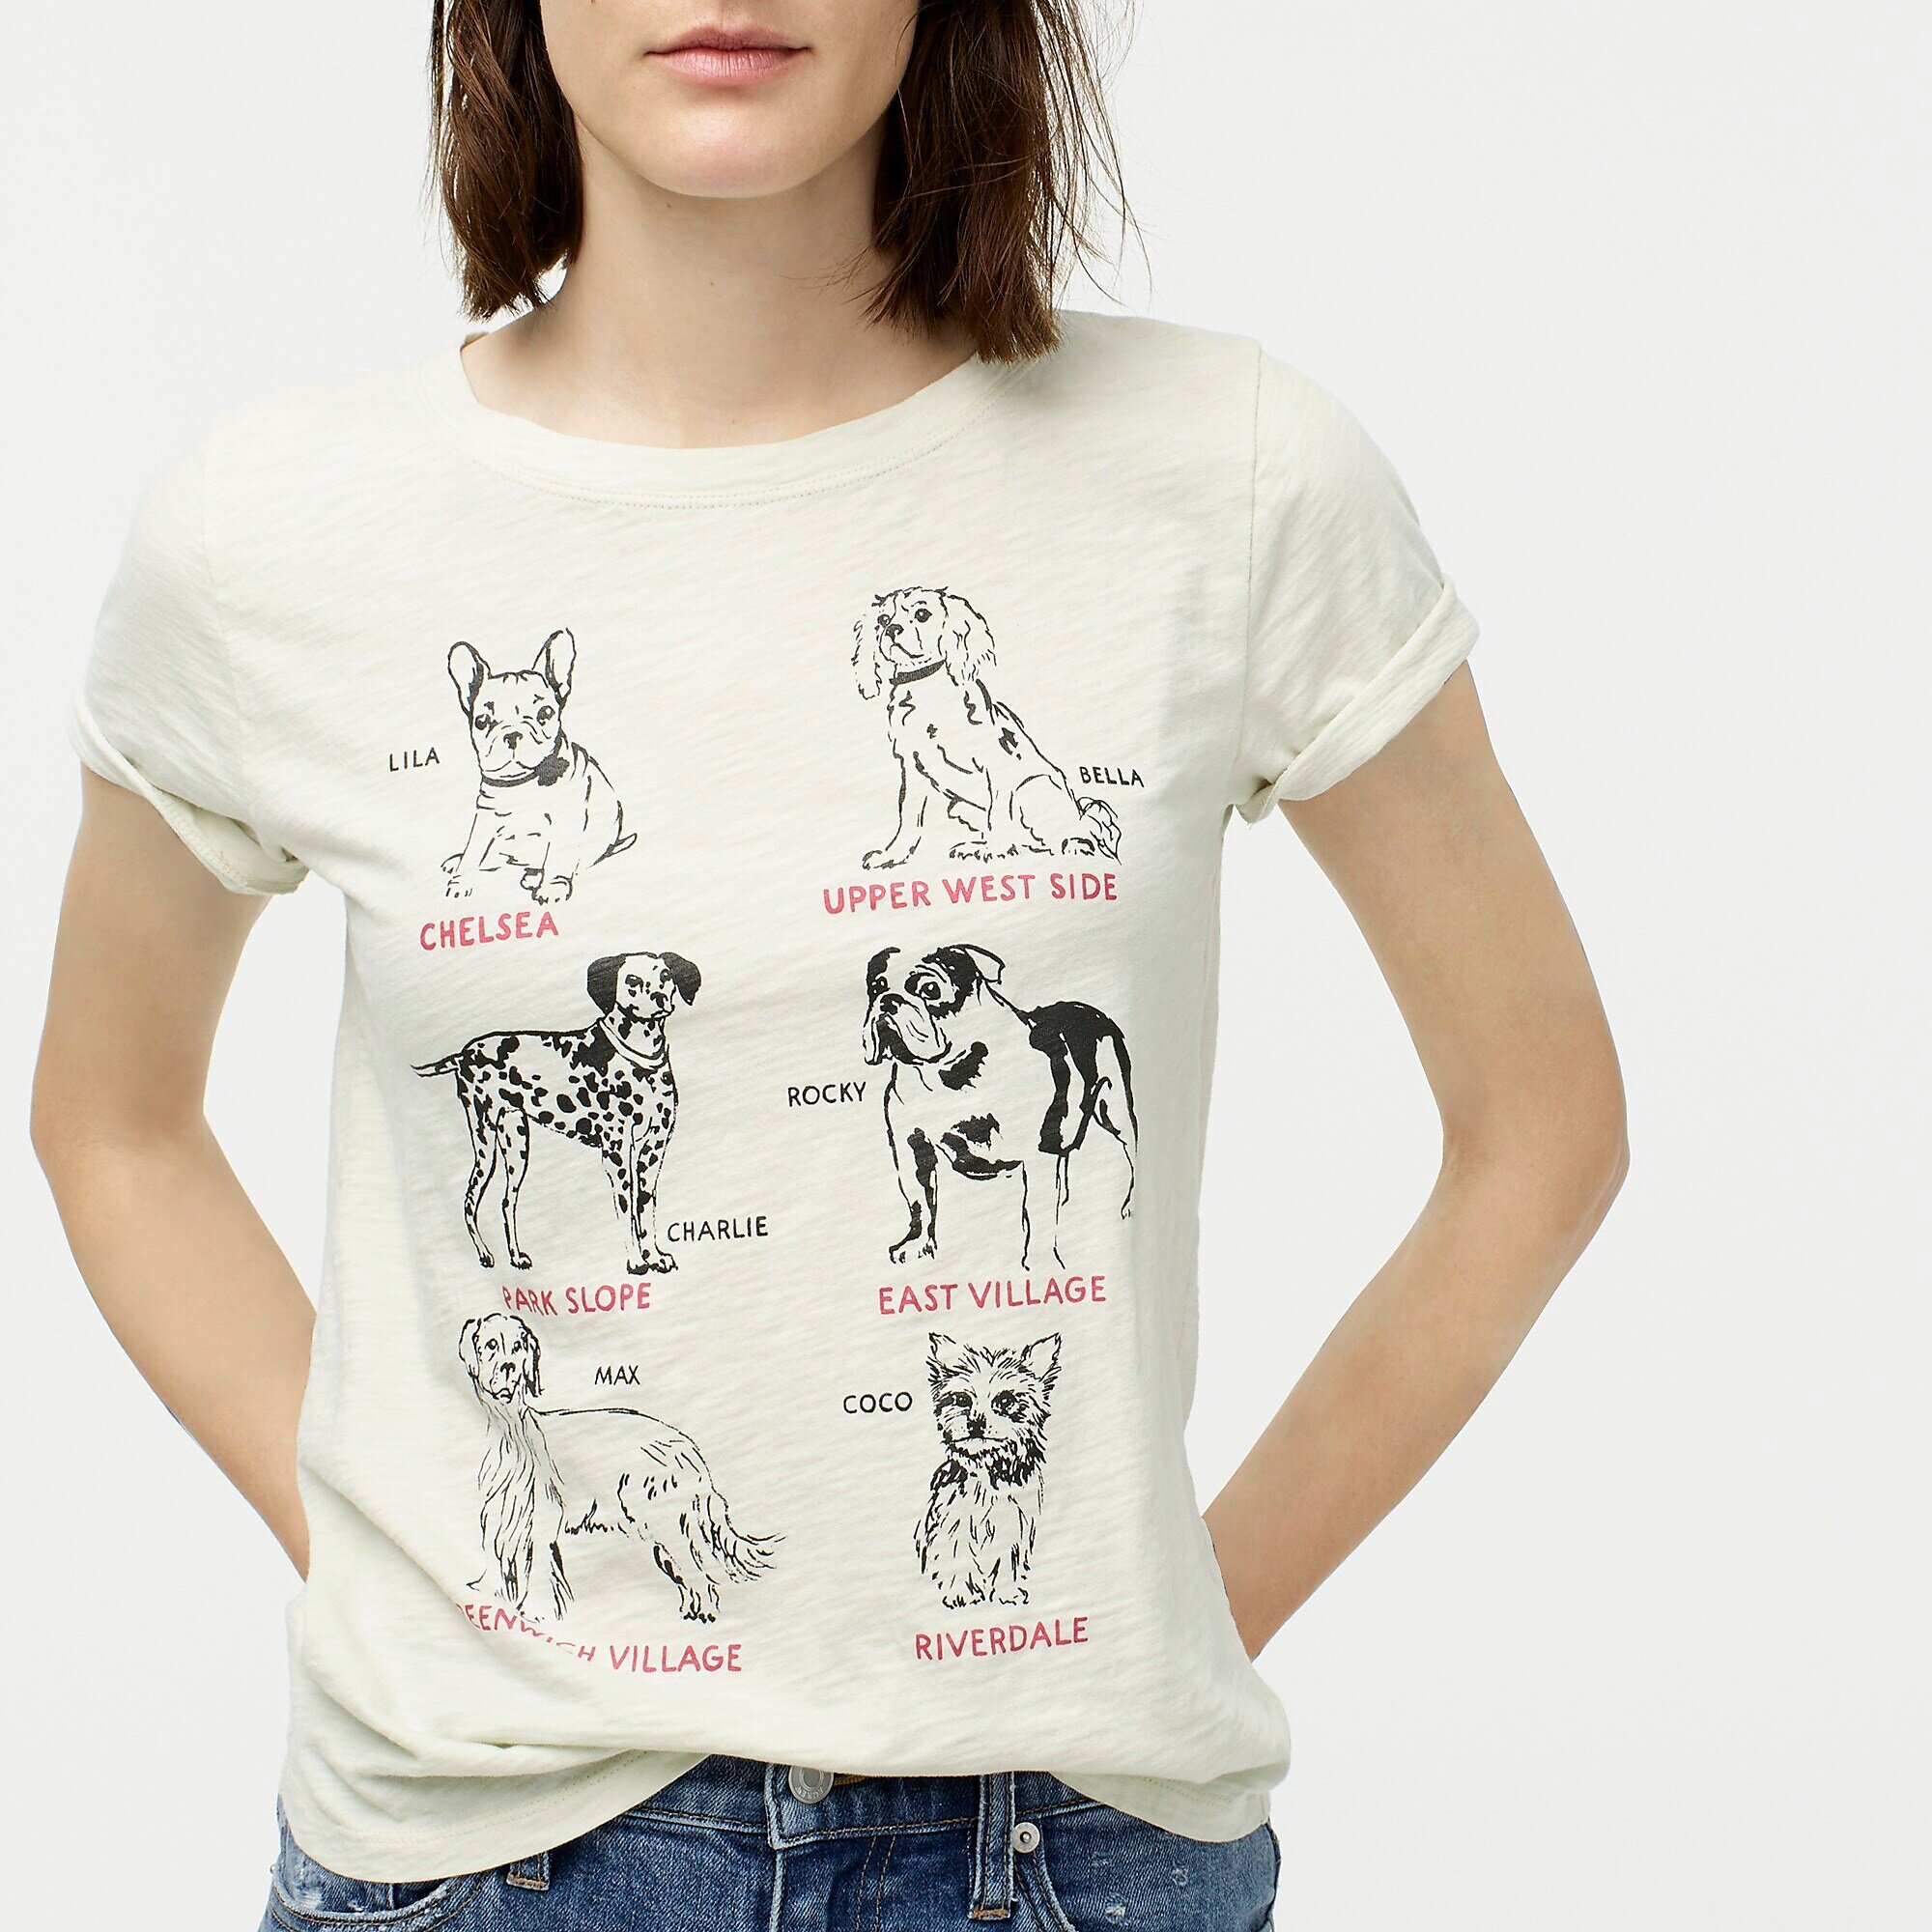 Camilla Atkins, CATKINS DESIGN for J. Crew, Summer 2019 Dogs of New York graphic design, screen printed tee shirt.jpeg